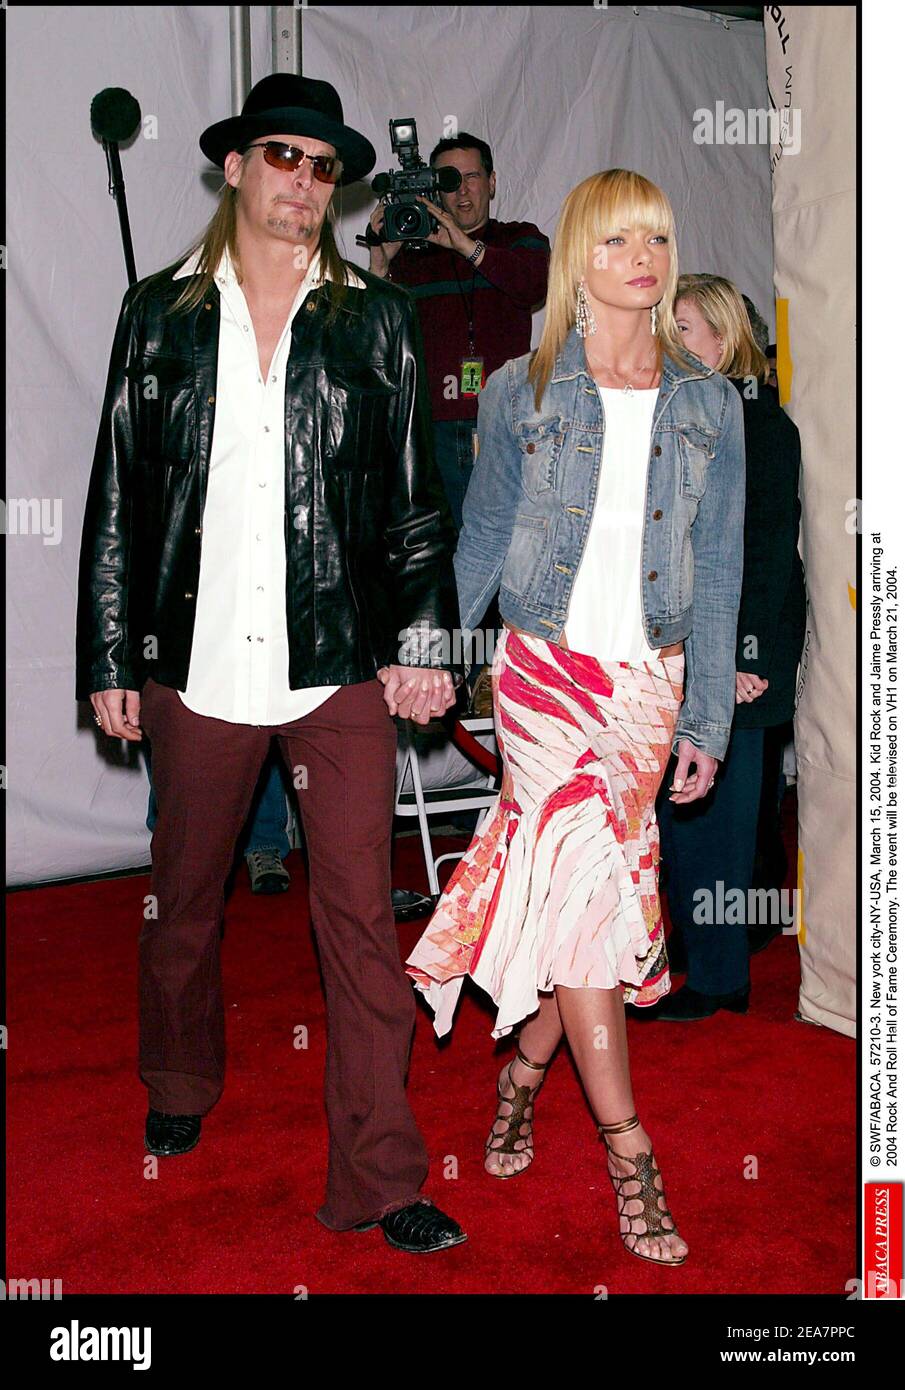 © SWF/ABACA. 57210-3. New york city-NY-USA, March 15, 2004. Kid Rock and Jaime Pressly arriving at 2004 Rock And Roll Hall of Fame Ceremony. The event will be televised on VH1 on March 21, 2004. Stock Photo